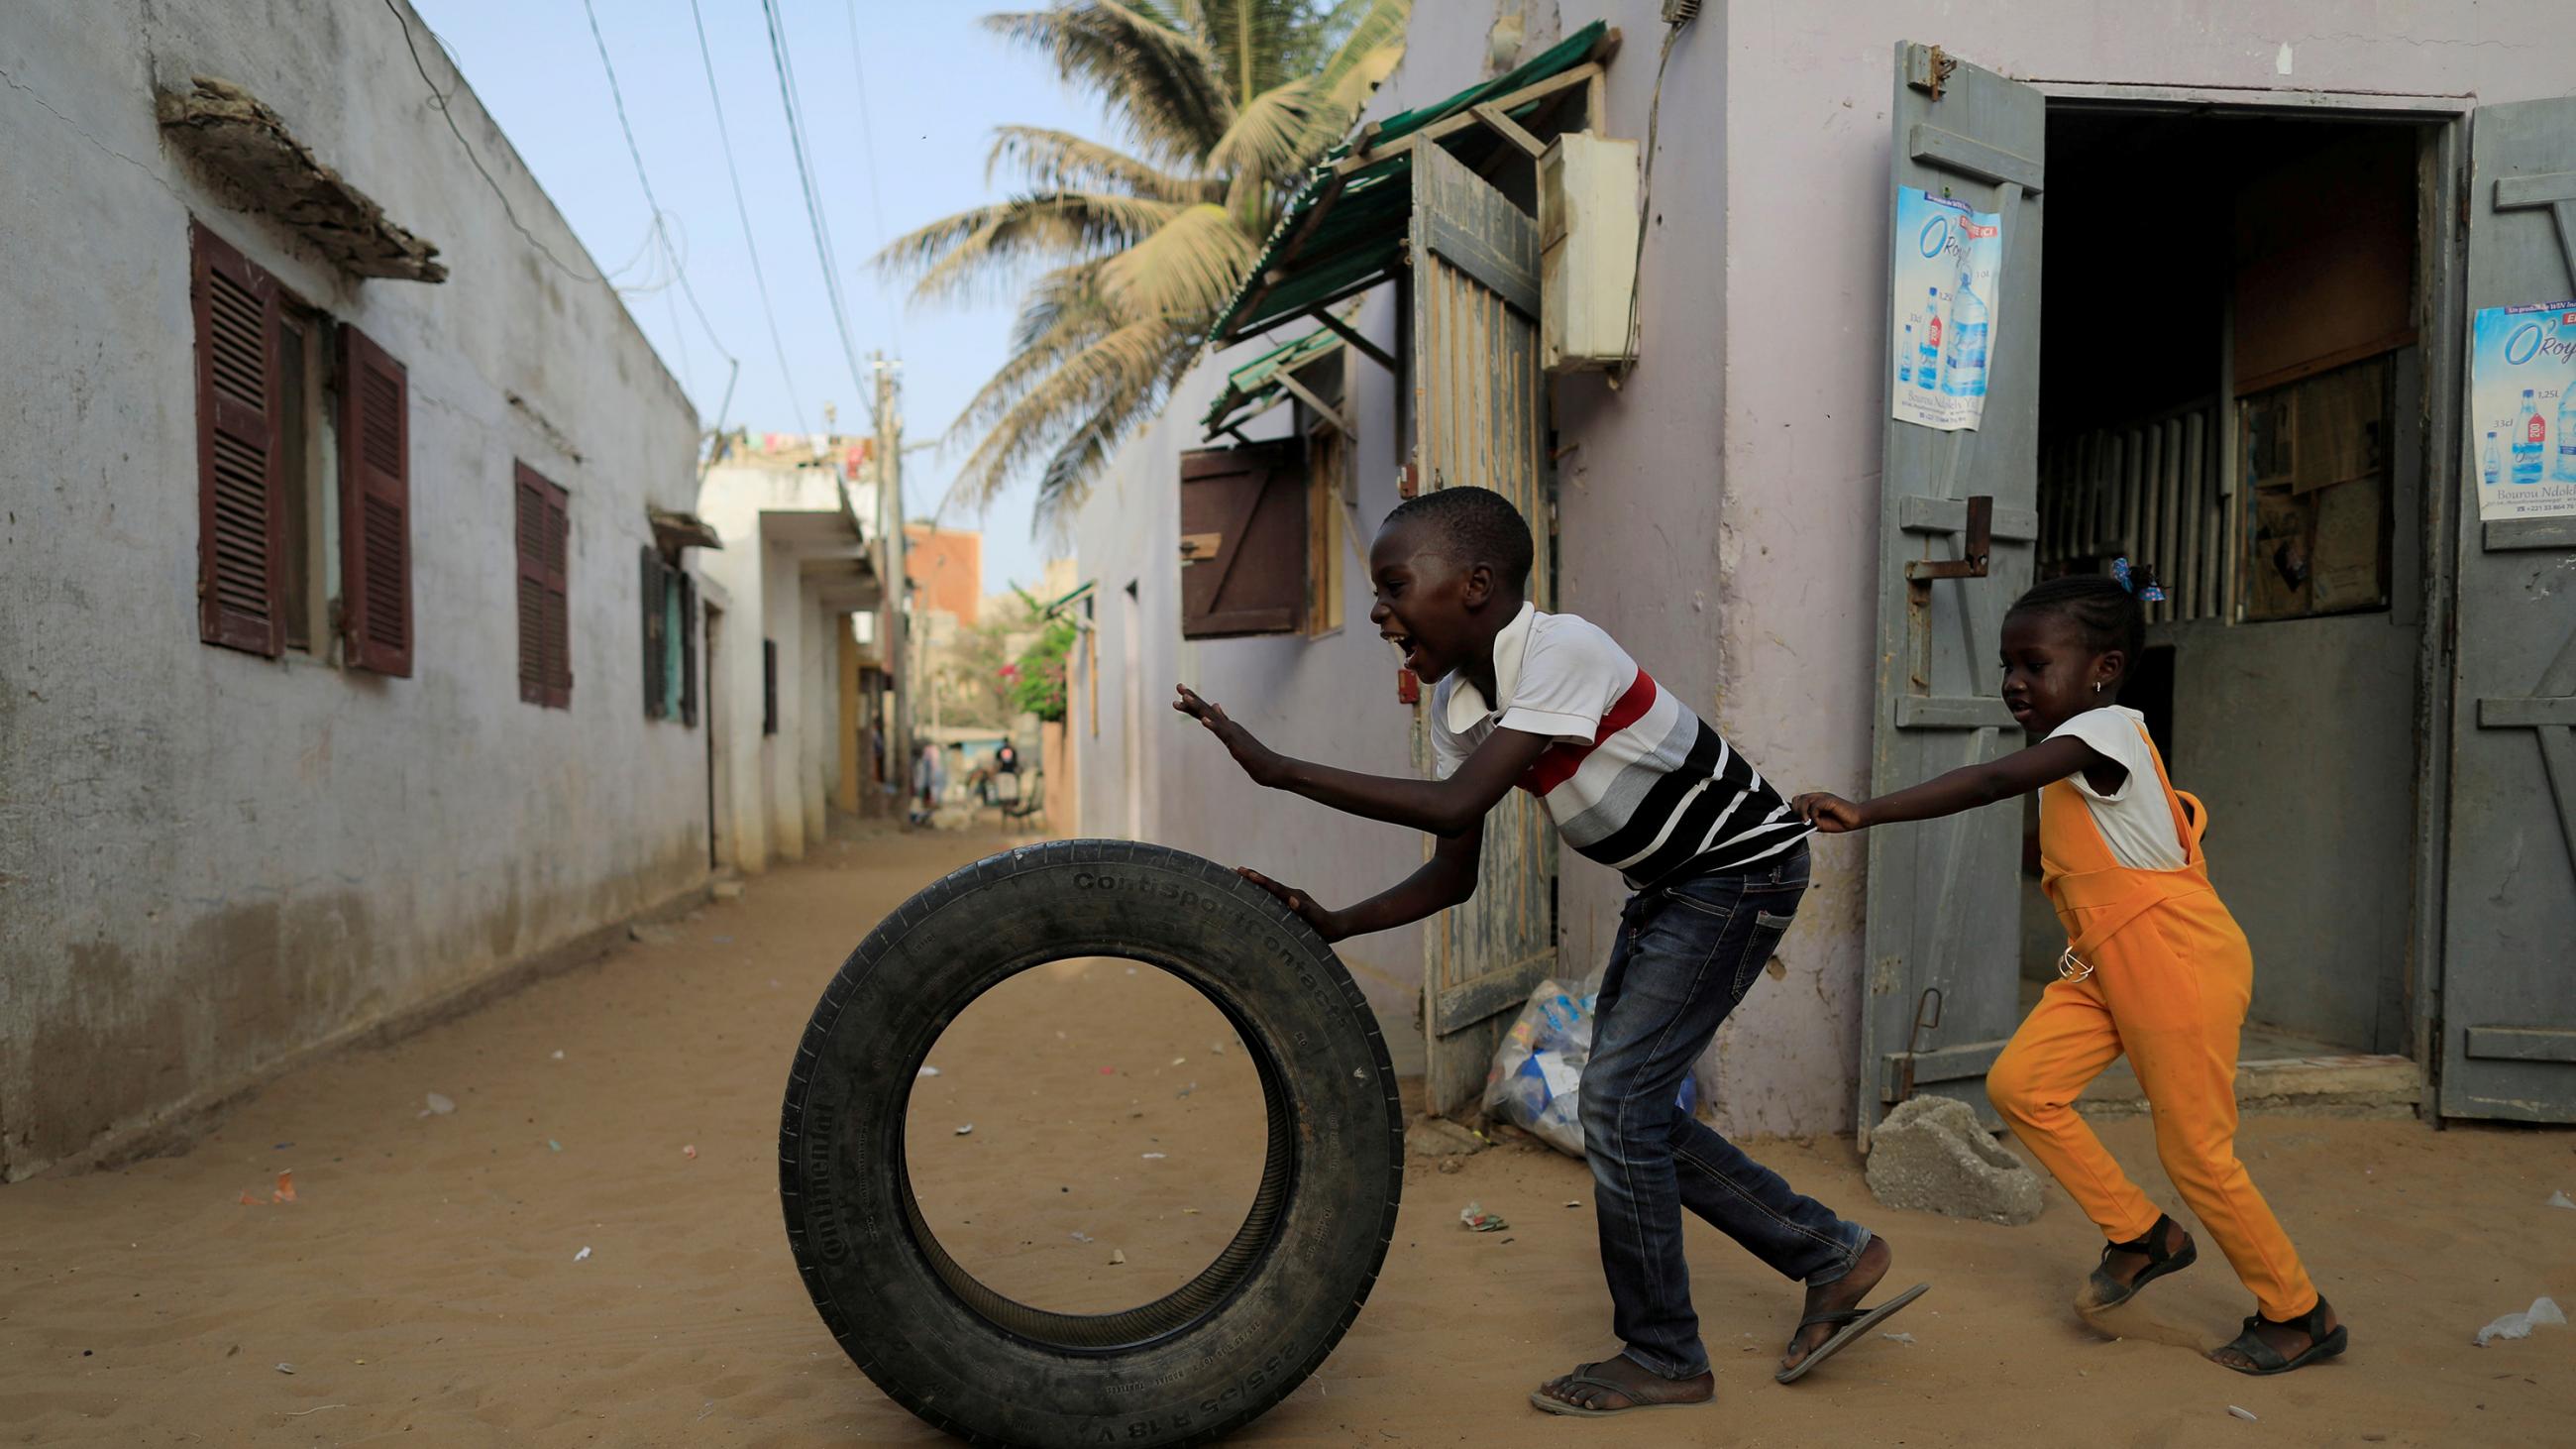 The image shows a boy and girl chasing a tire. 